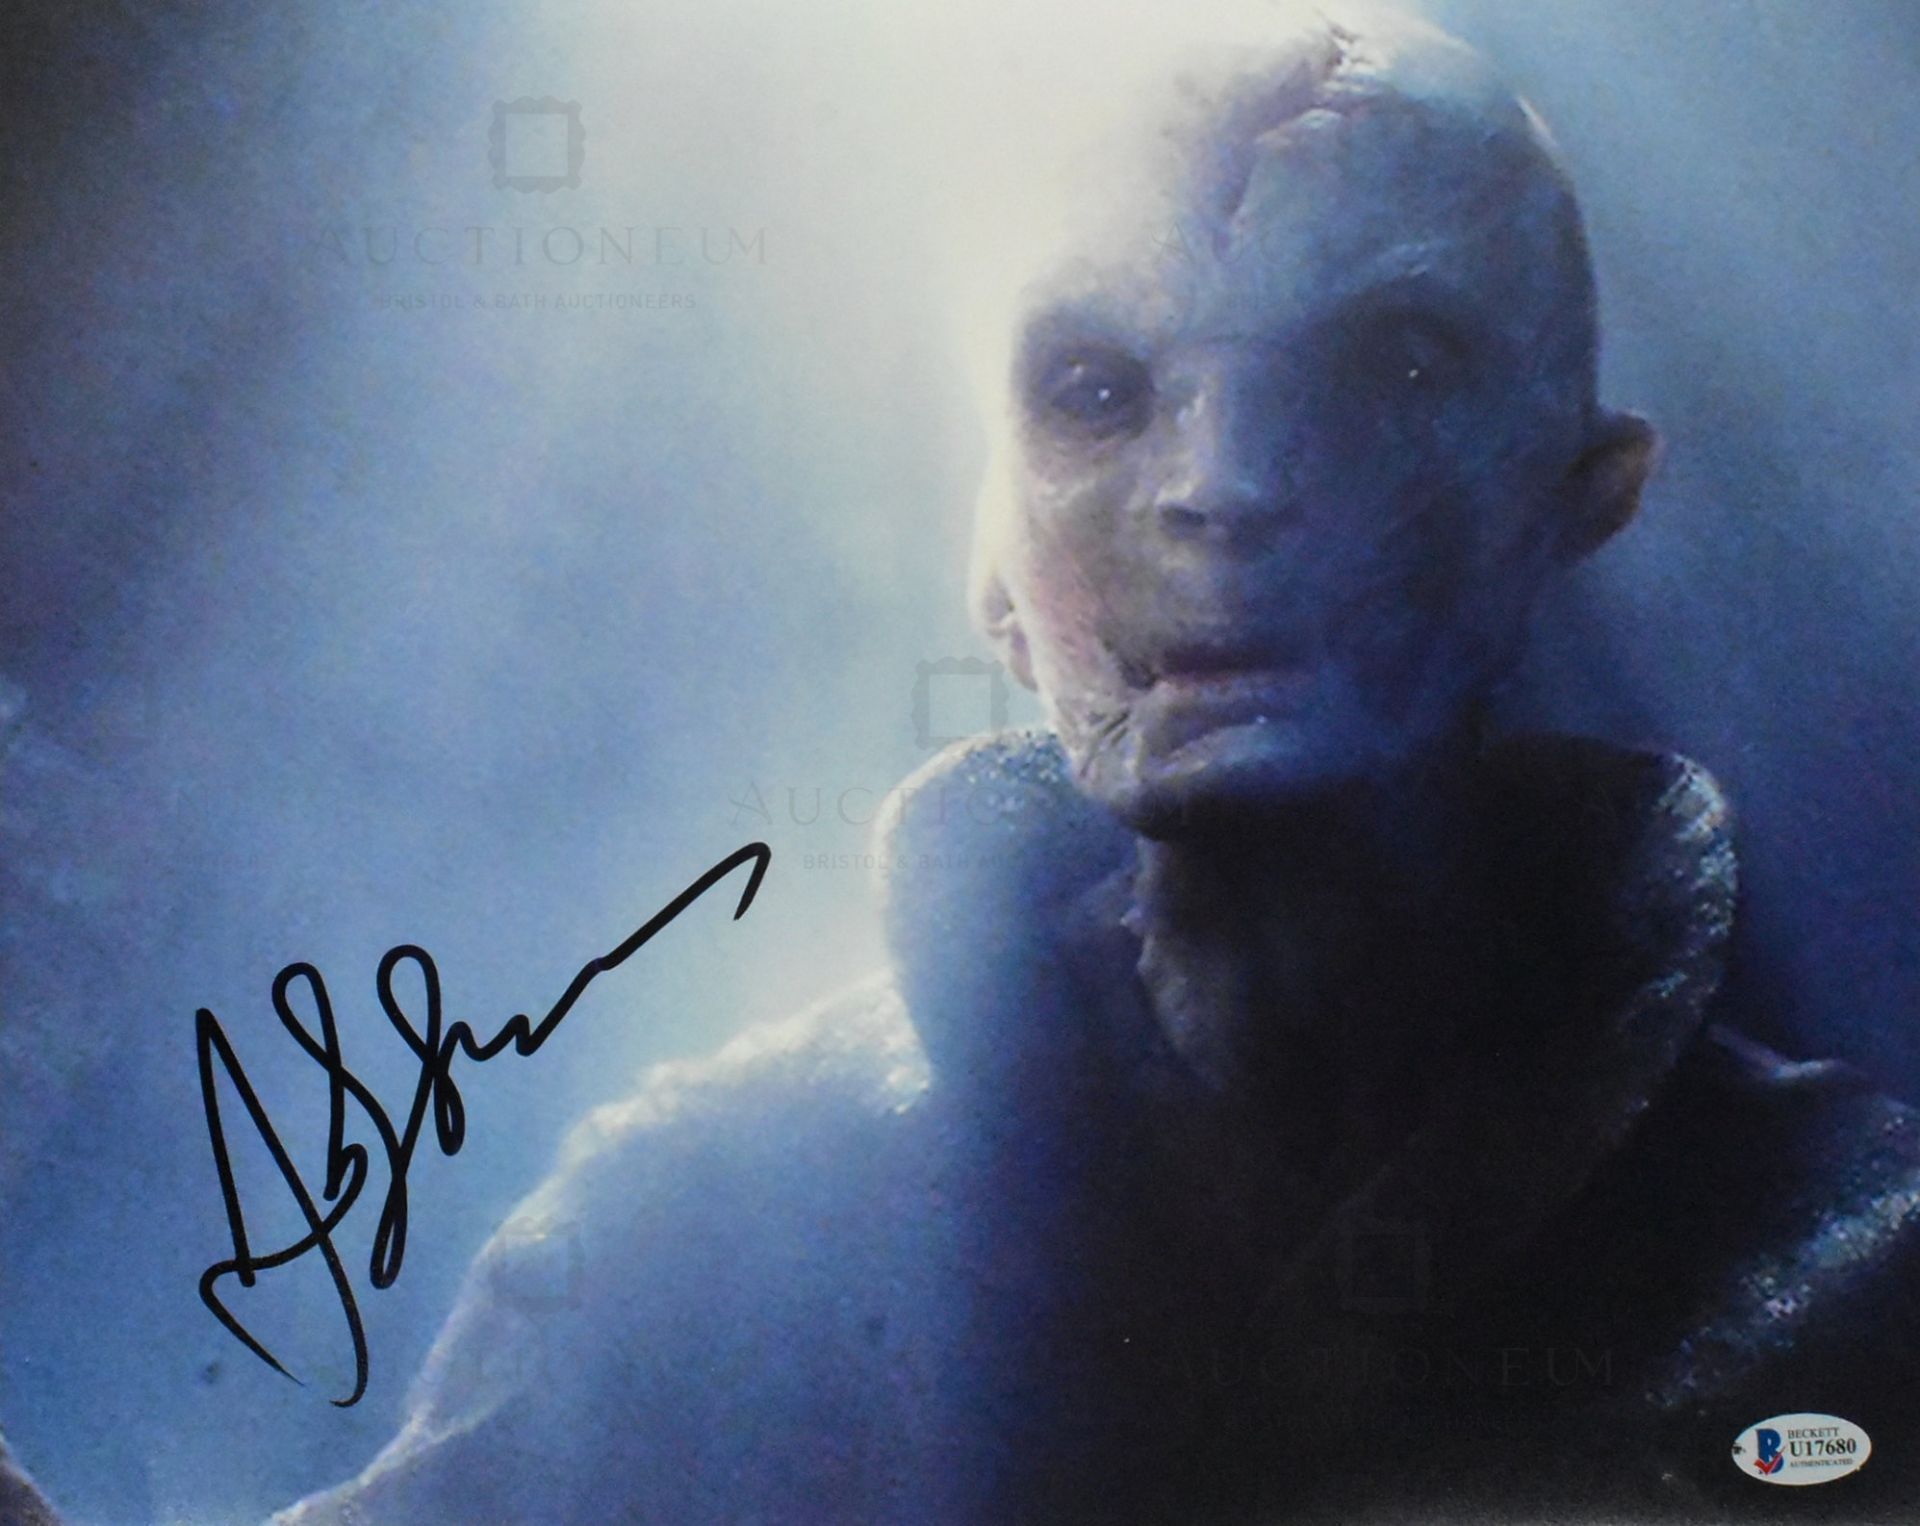 STAR WARS - ANDY SERKIS - AUTOGRAPHED 11X14" PHOTO - BECKETT